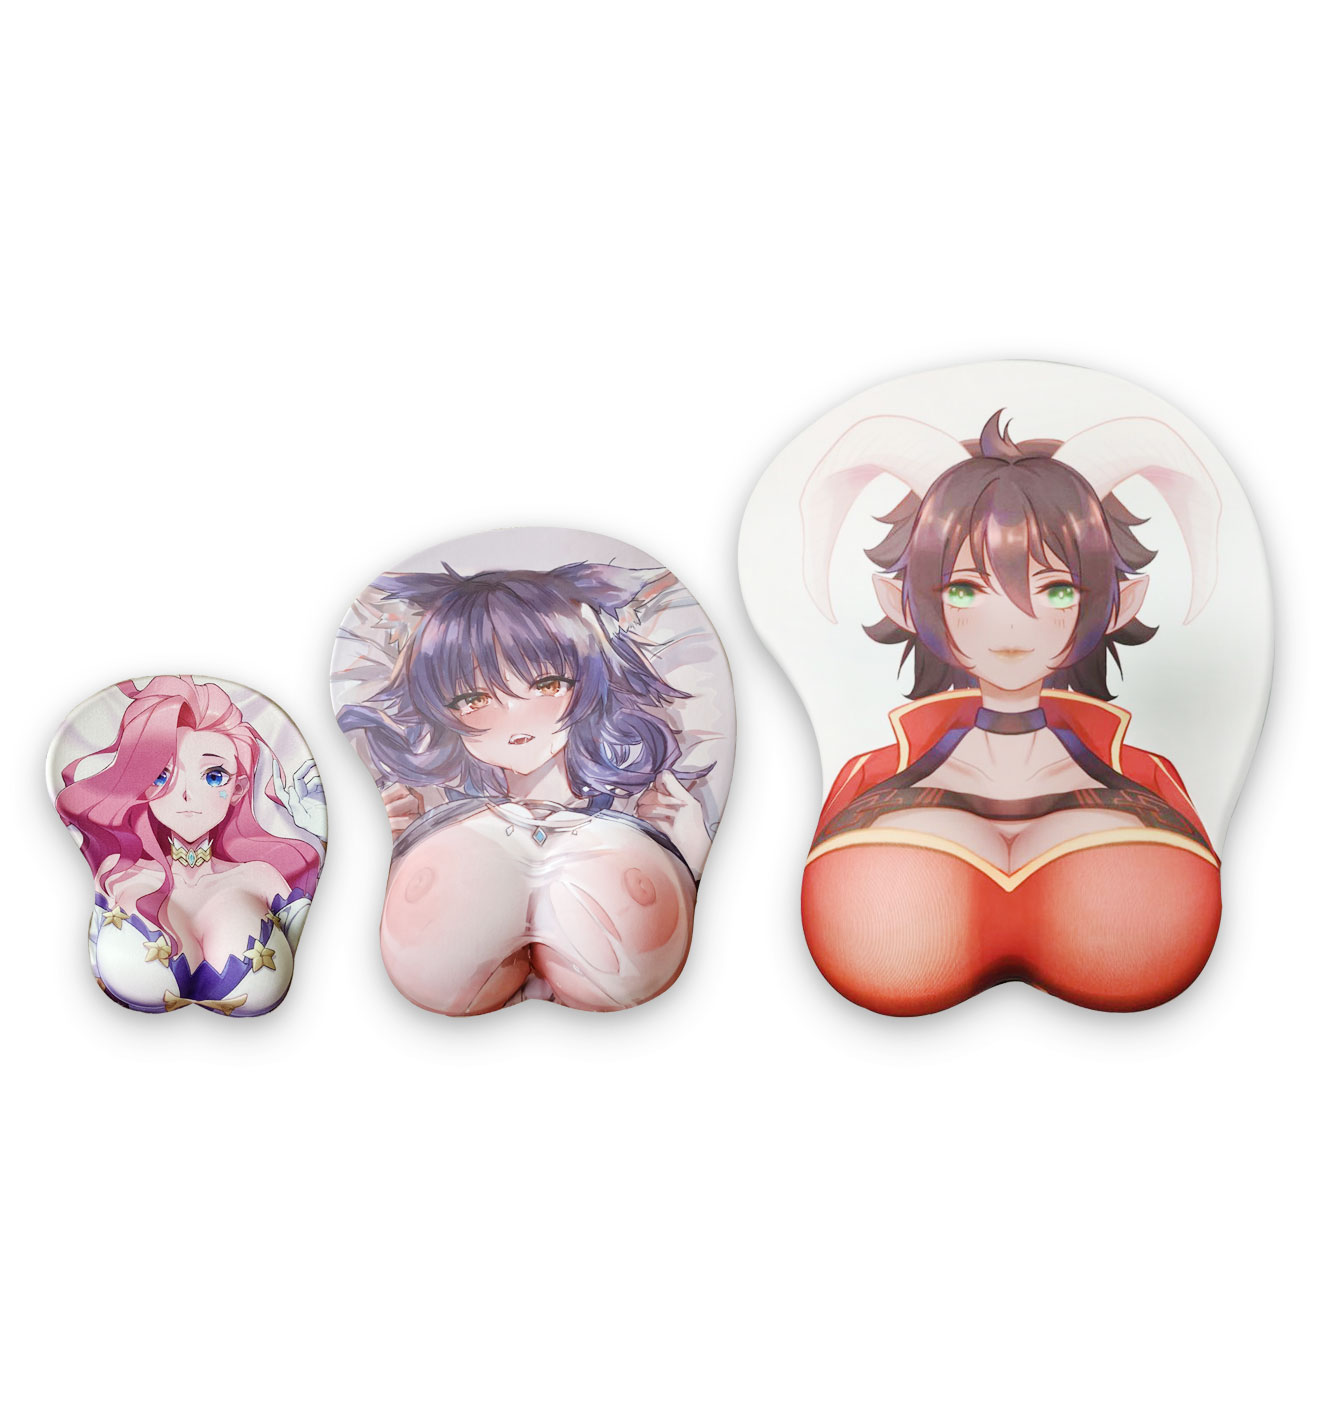 pink double ponytail girl life size oppai mousepad 4768 - Anime Mousepads